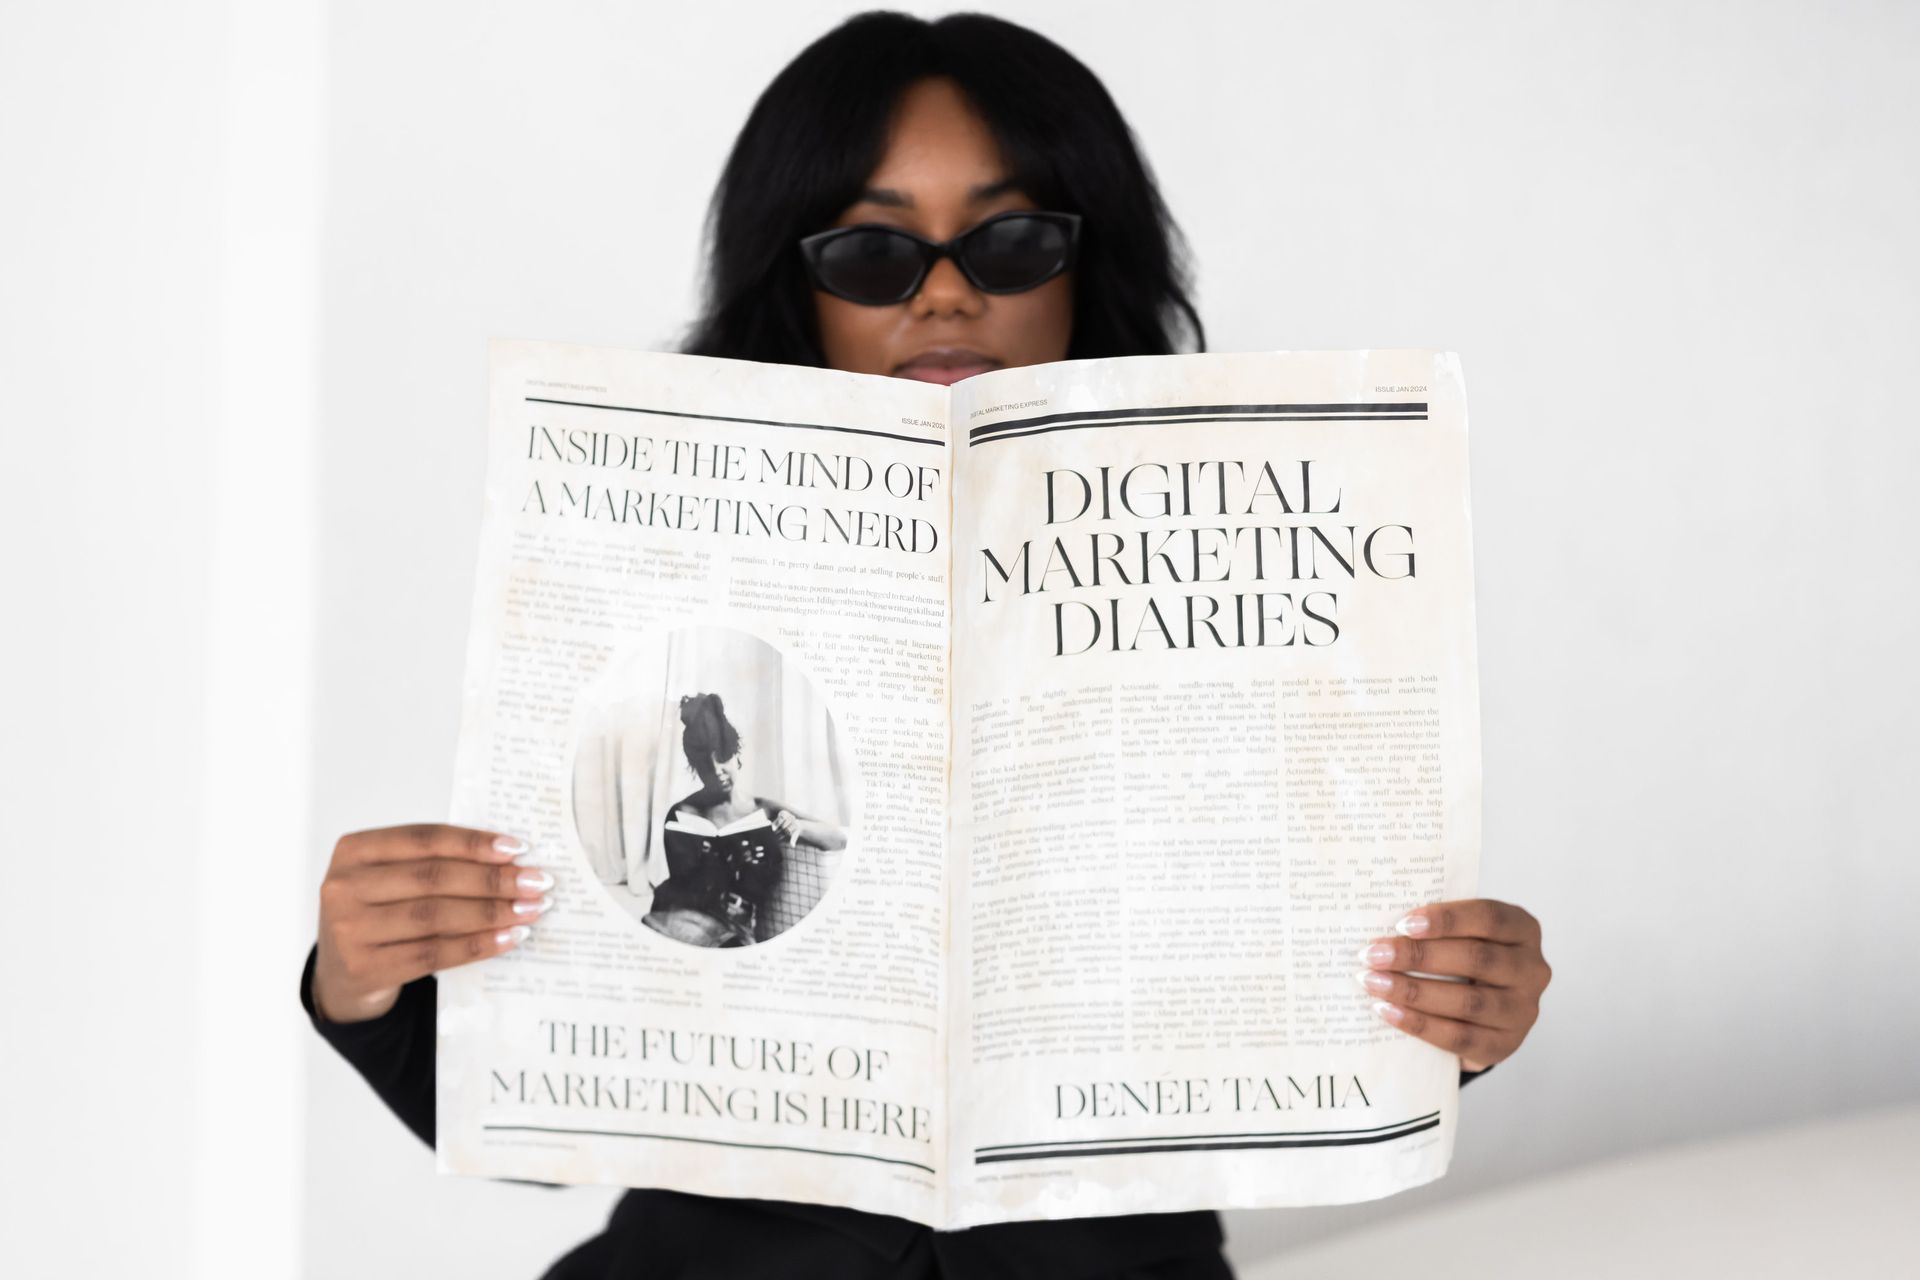 A woman wearing sunglasses holds up a newspaper featuring the headline 